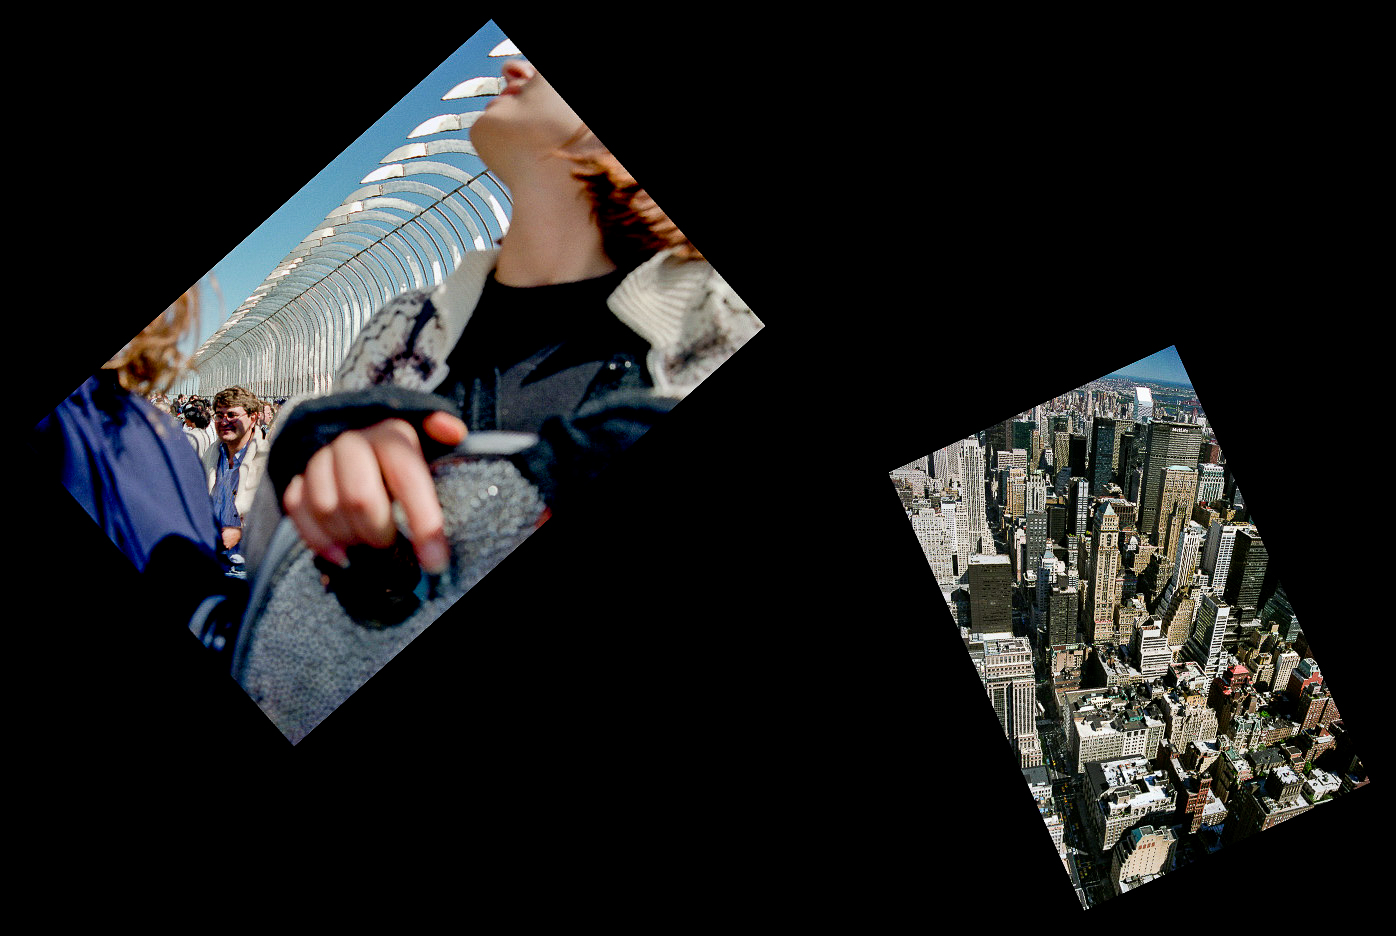 "Girl  Empire State Building", 1998, © Lewis Rogers, Contemporary Art Photography,  Contemporary Photography, Color Film Photography, 20th Century Photography, Photo-Sequence, Diptych Photography, Polyptych Photography,Triptych Photography, Postmodern Photography, 1990’s Photography, Constructivism Photography